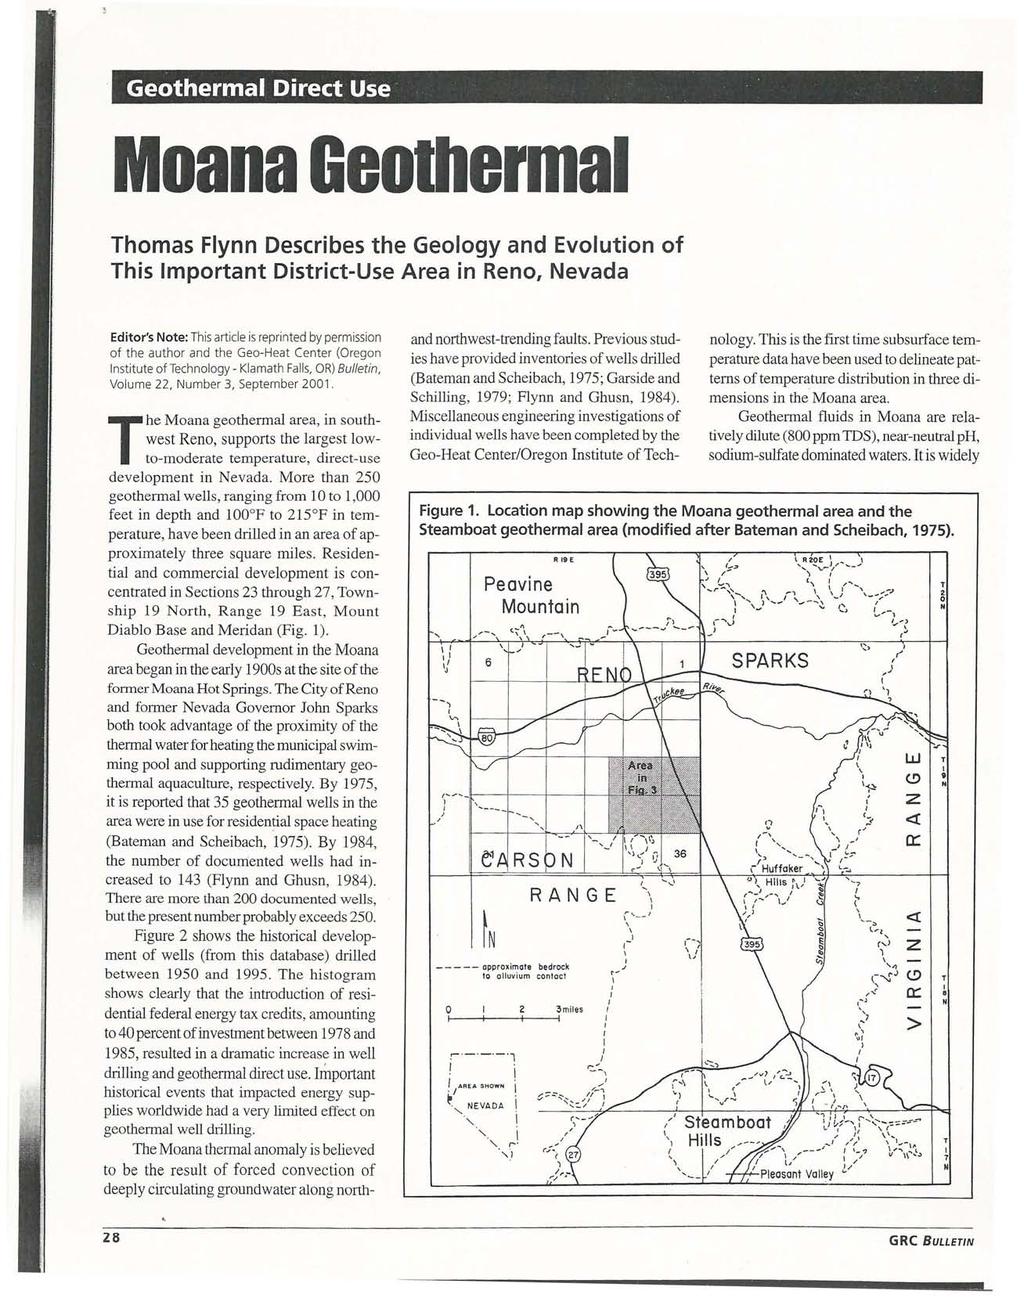 Geothermal Direct Use ' Moana Geothermal Thomas Flynn Describes the Geology and Evolution of This mportant District-Use Area in Reno, Nevada Editor's Not e: This article is repri nted by permission